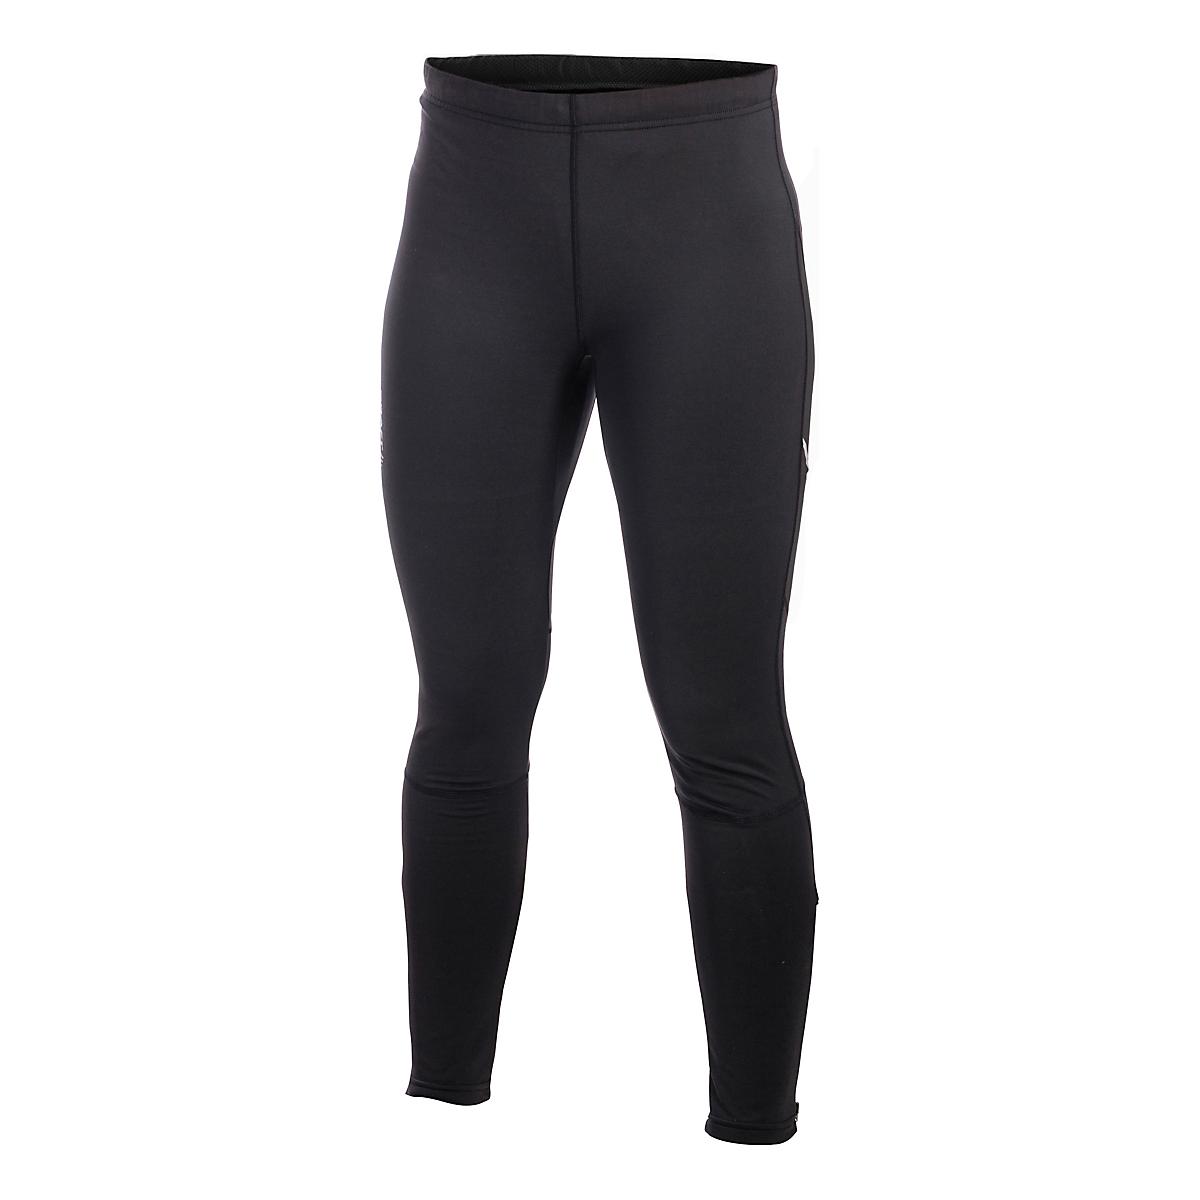 Womens CW-X Performx Fitted Tights at Road Runner Sports